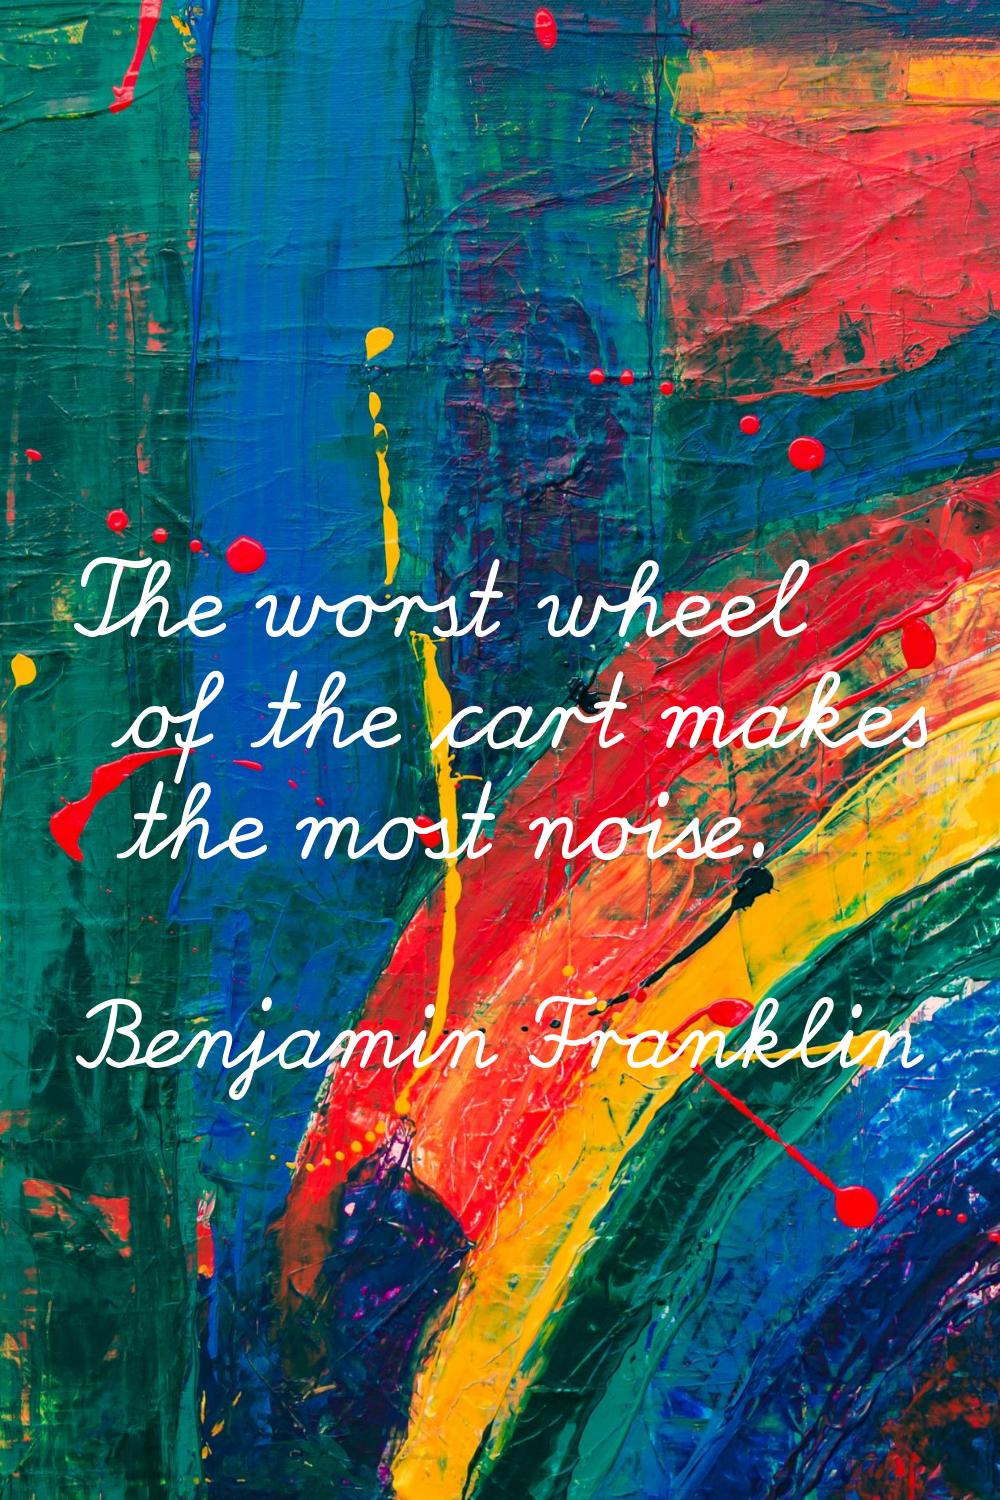 The worst wheel of the cart makes the most noise.